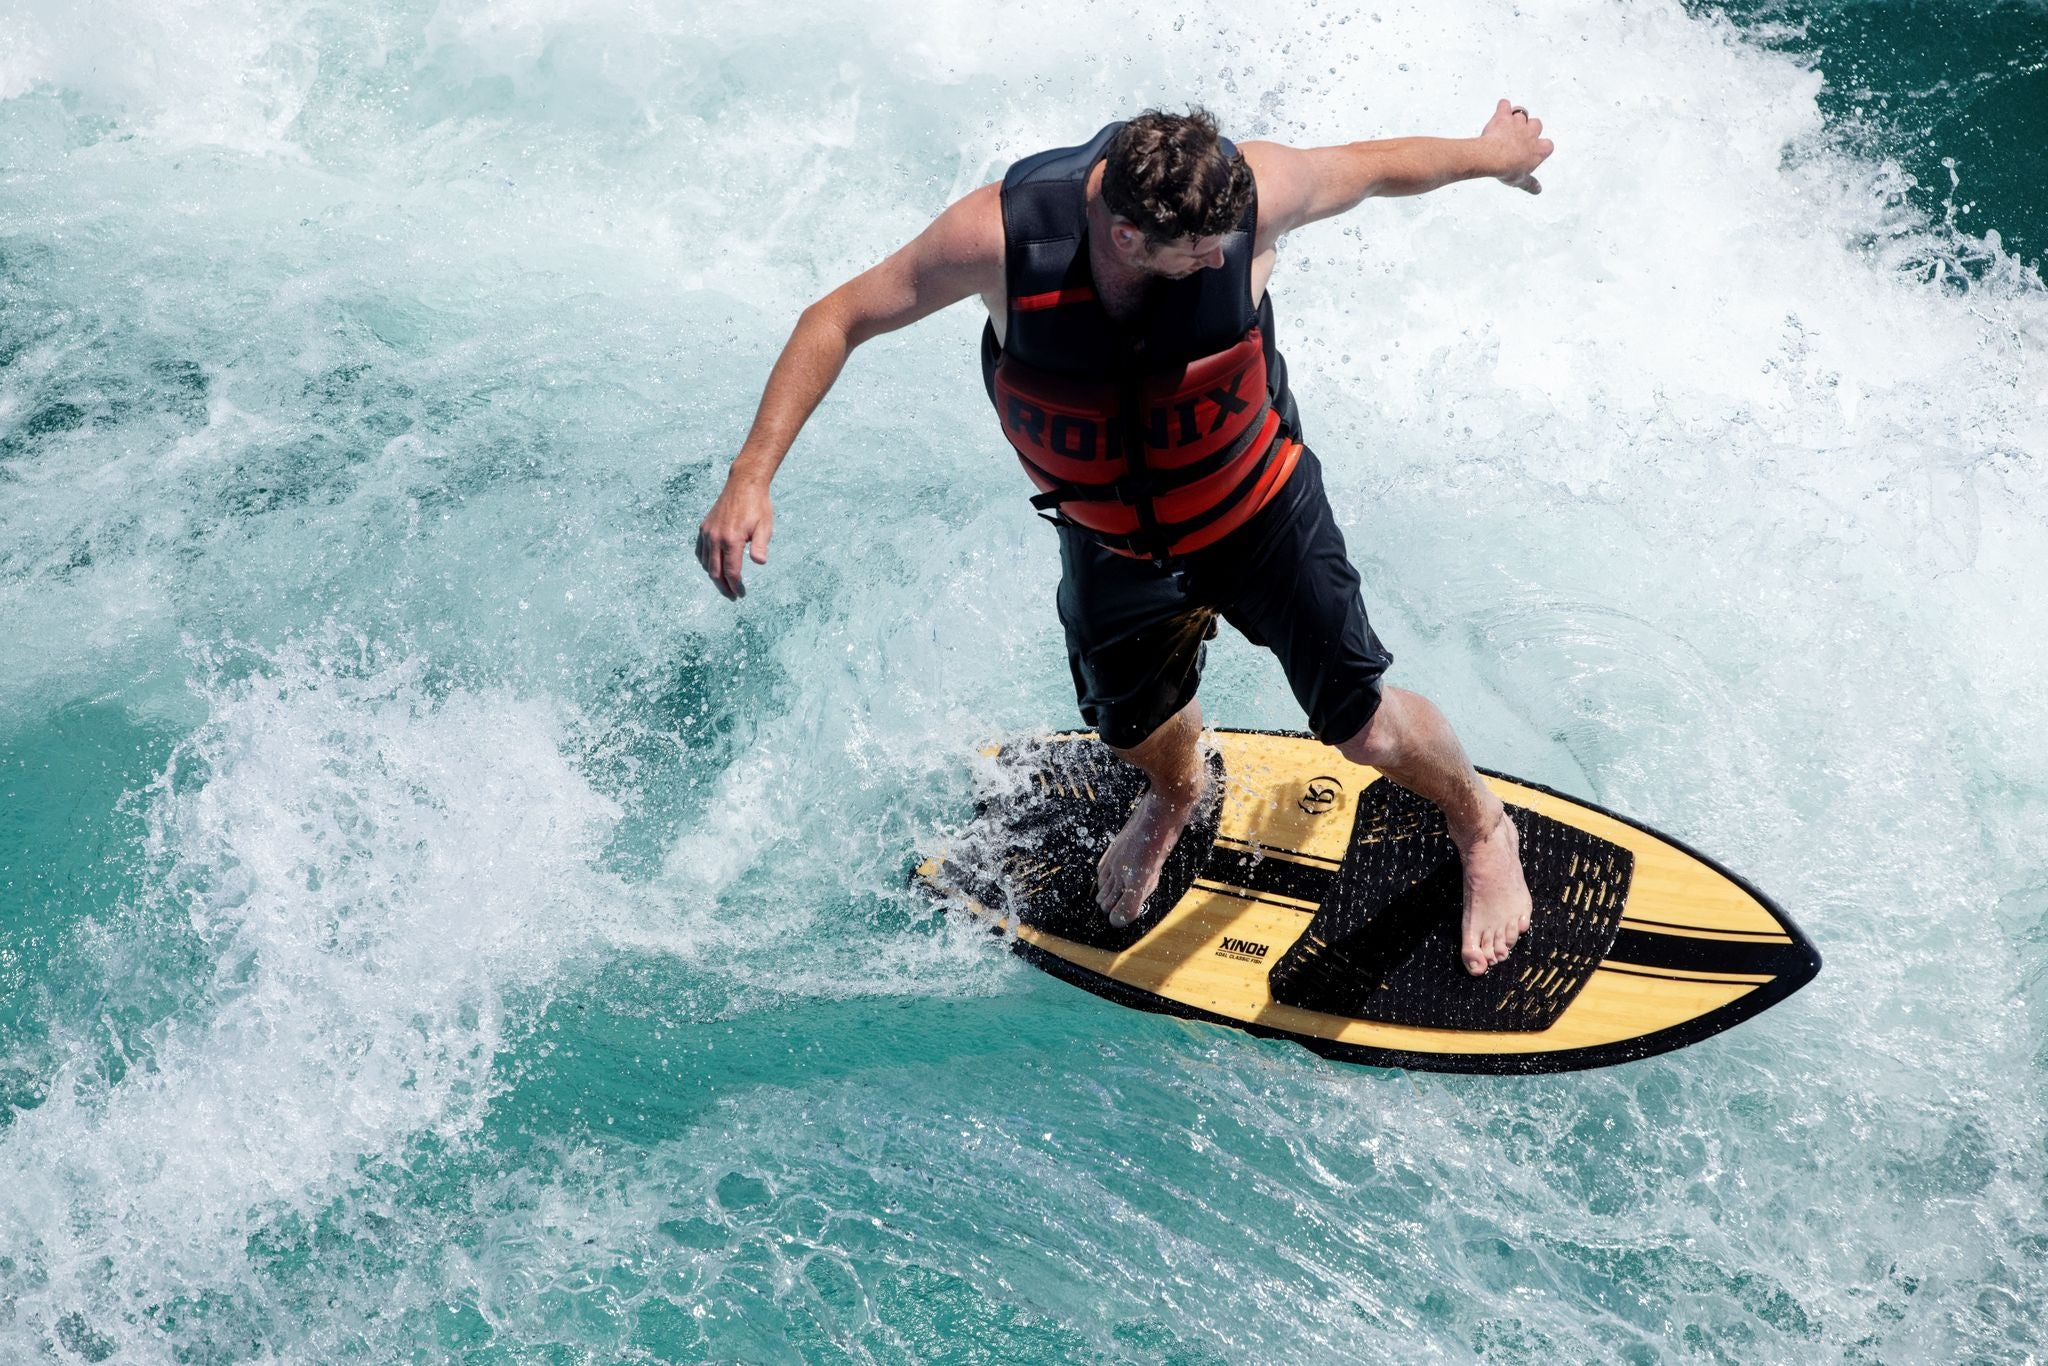 A man riding a wave on a surfboard with the Ronix Megacorp Capella 3.0 Men's CGA Vest.